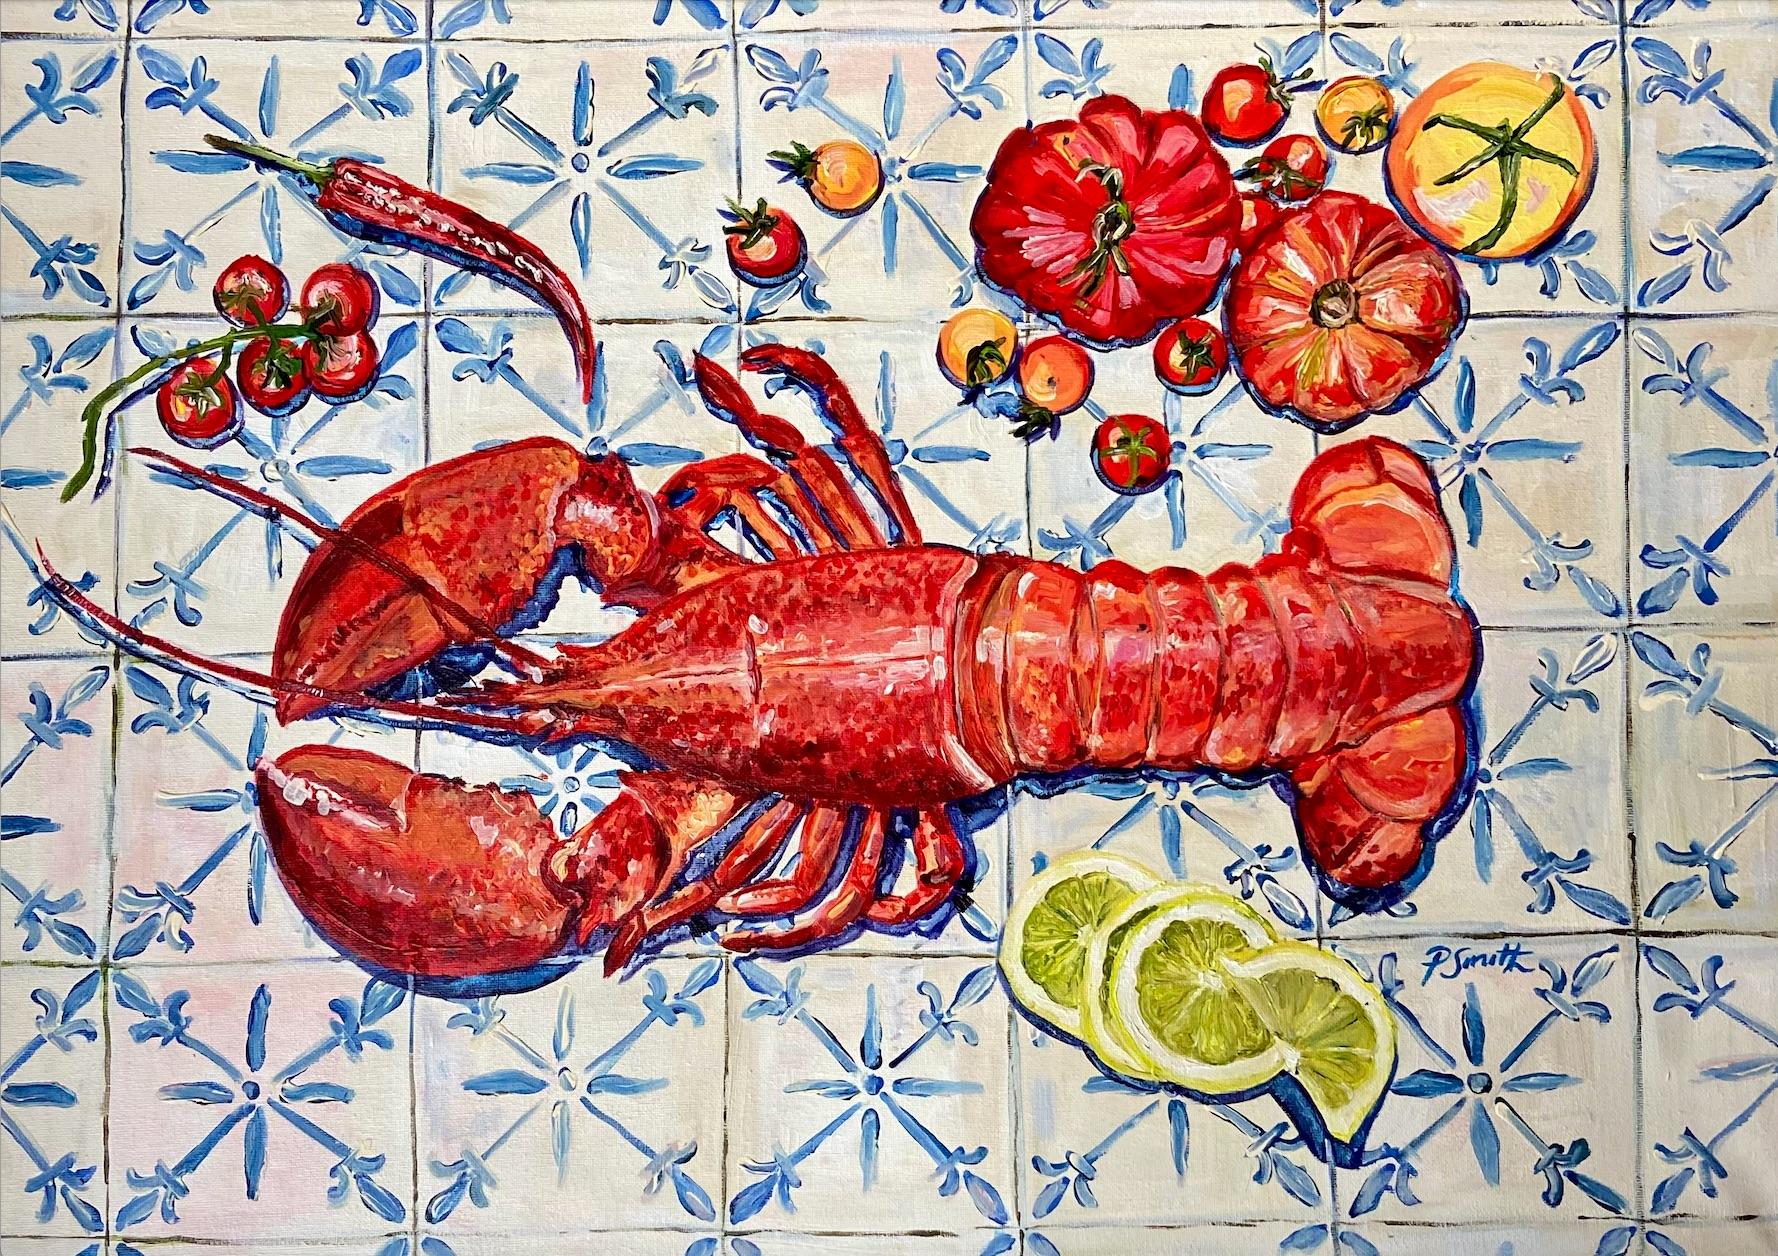 The Italian Table, Lobster, Original painting, Food art, Seafood, Mediterranean - Painting by Pippa Smith